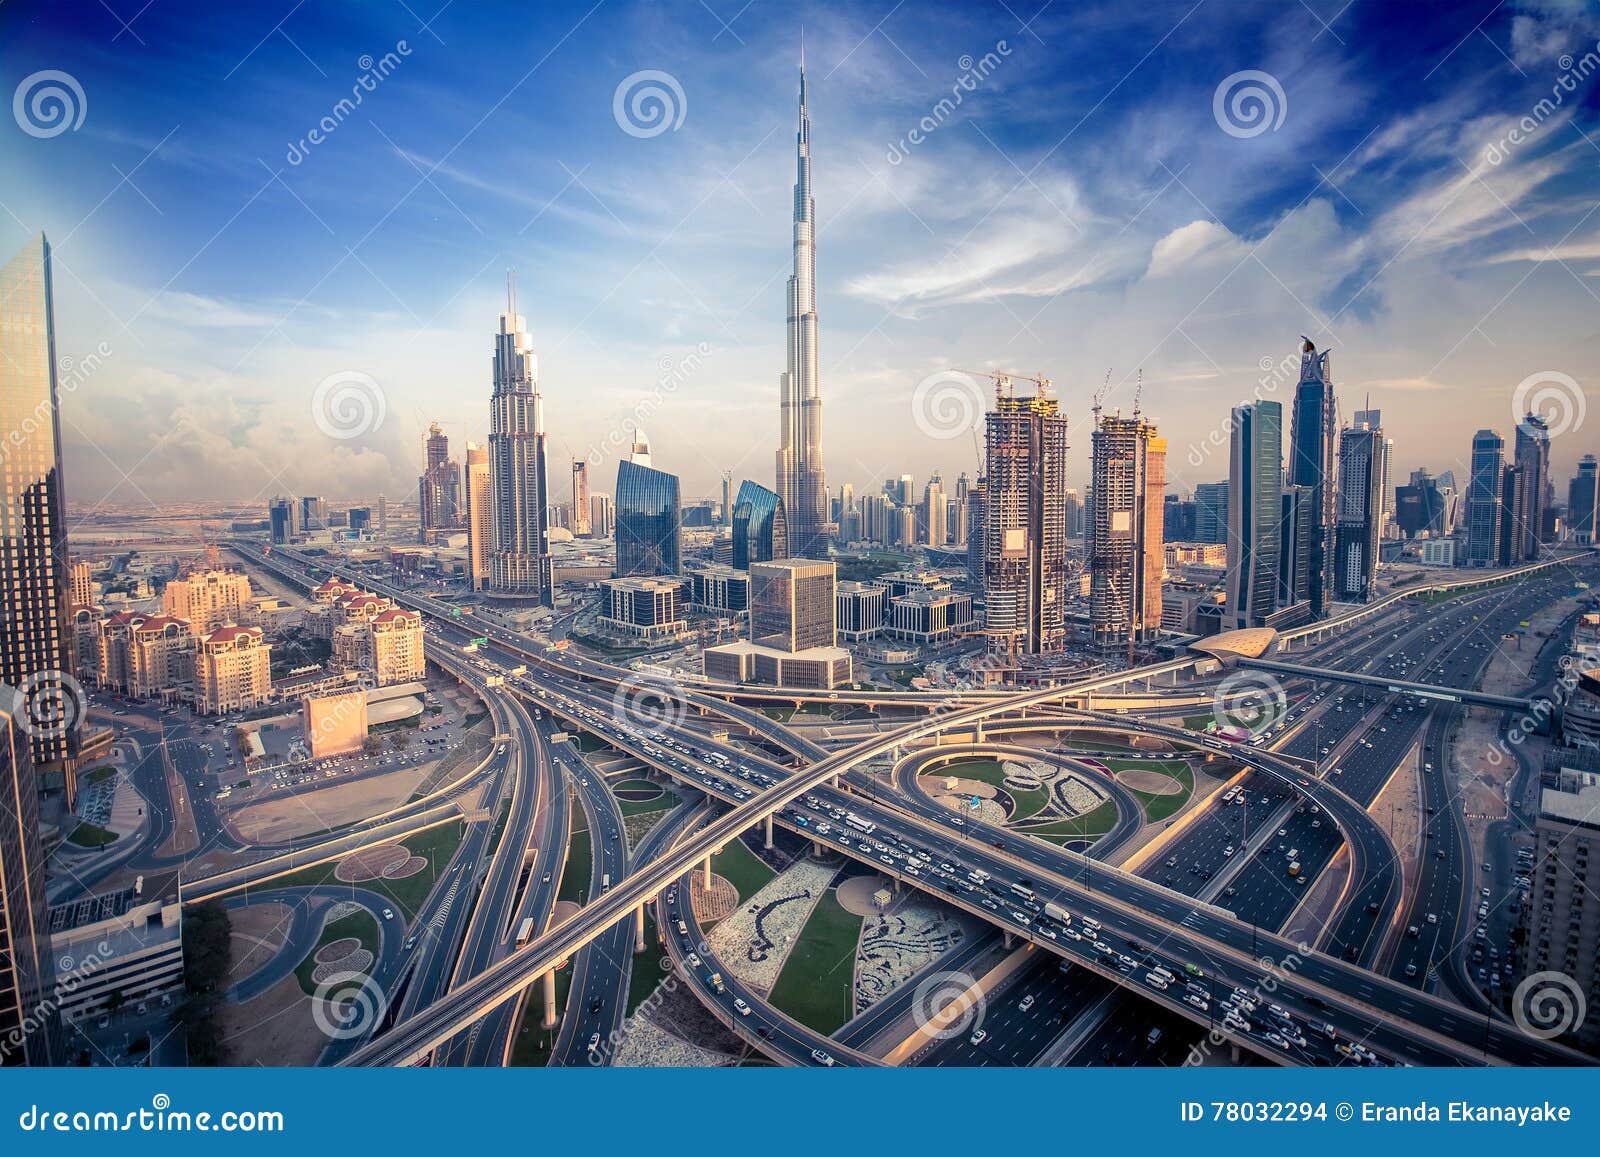 dubai skyline with beautiful city close to it's busiest highway on traffic